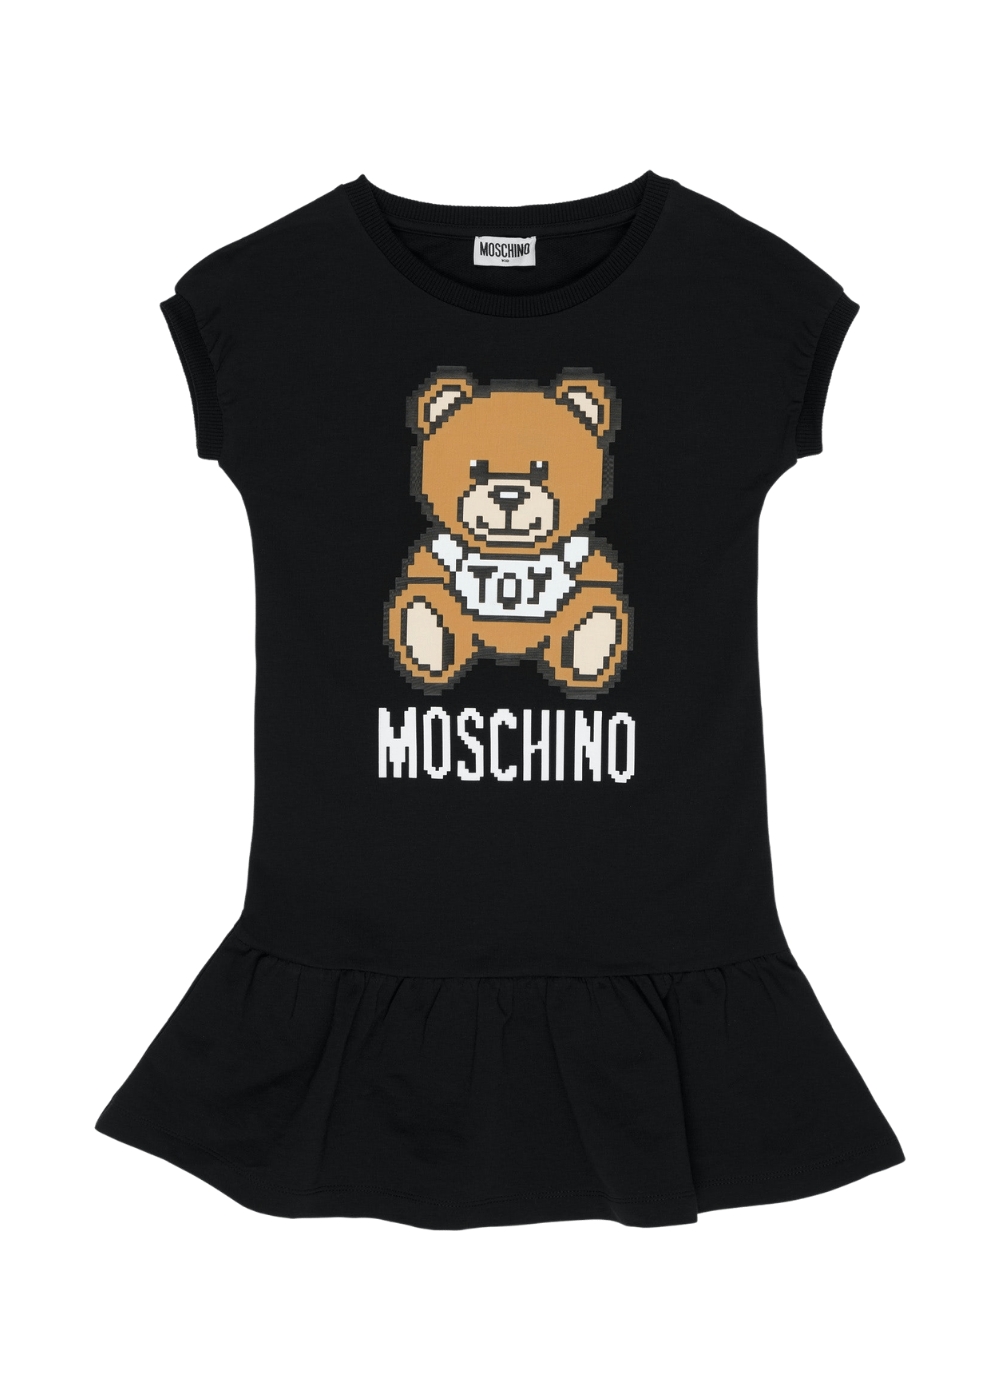 Featured image for “Moschino Abito Teddy Bear”